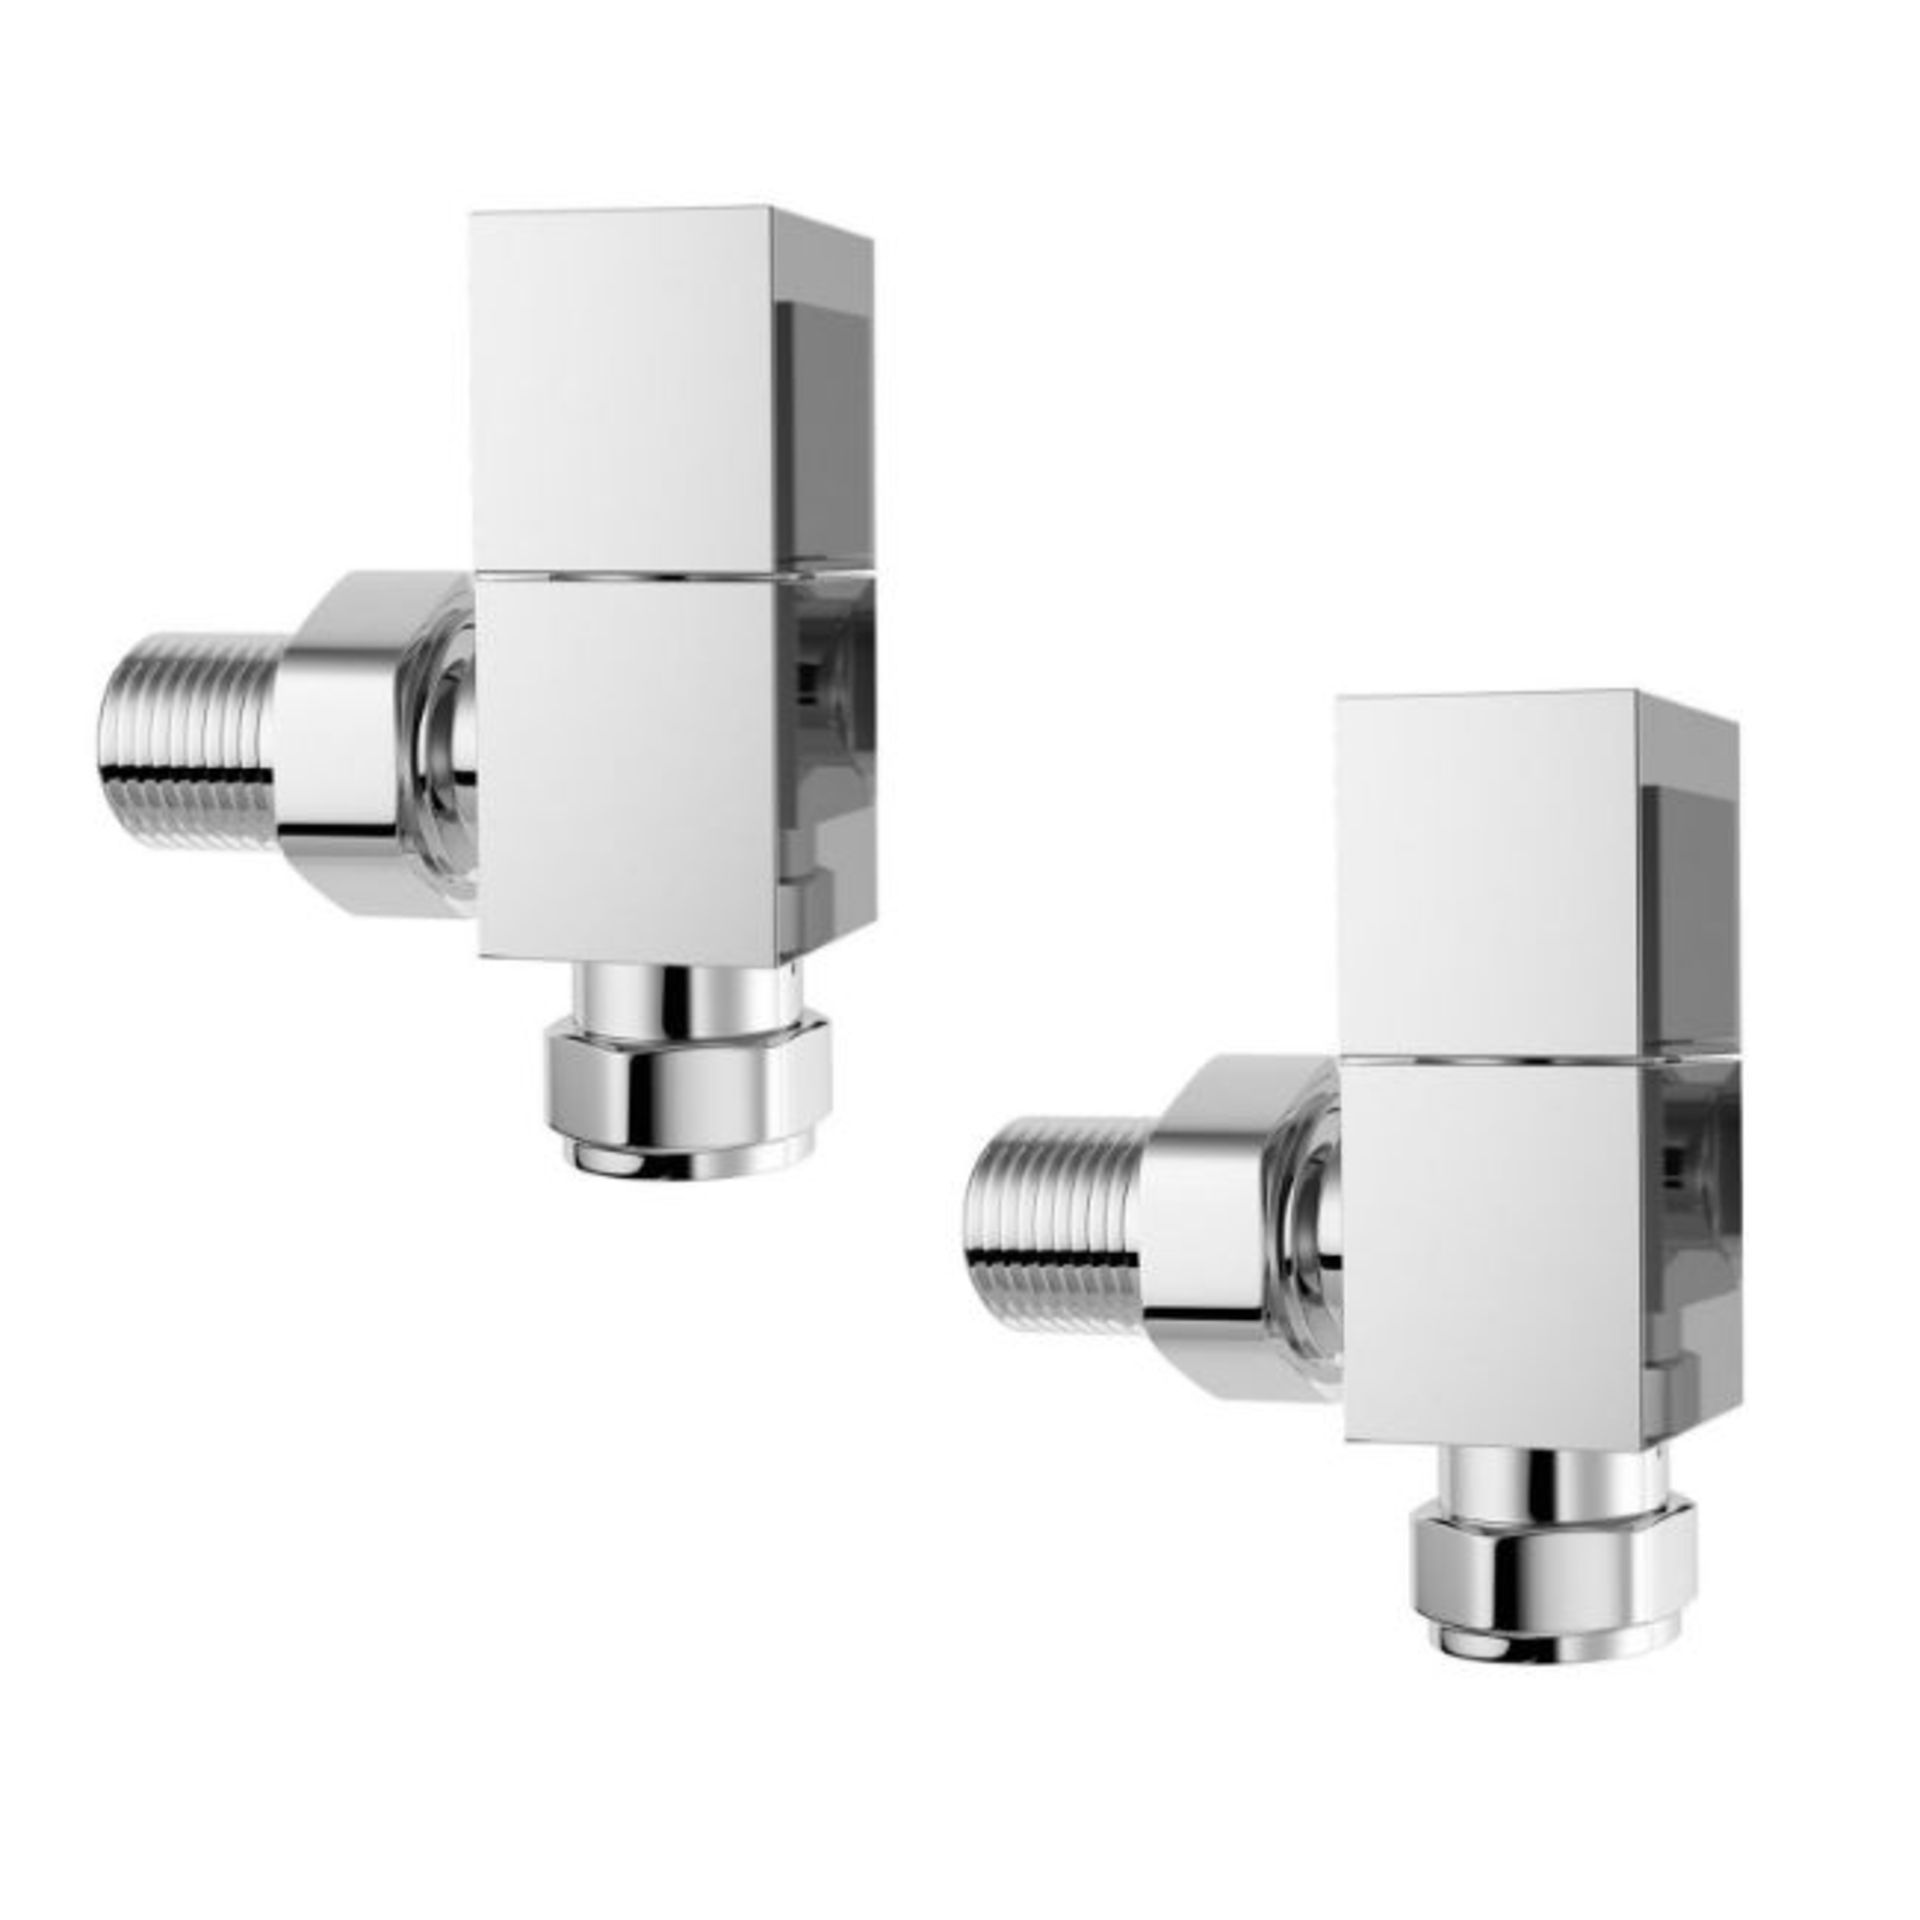 New Square Chrome Angled Radiator Valves 15mm Central Heating Taps. Ra35A. Chrome Plated Solid...